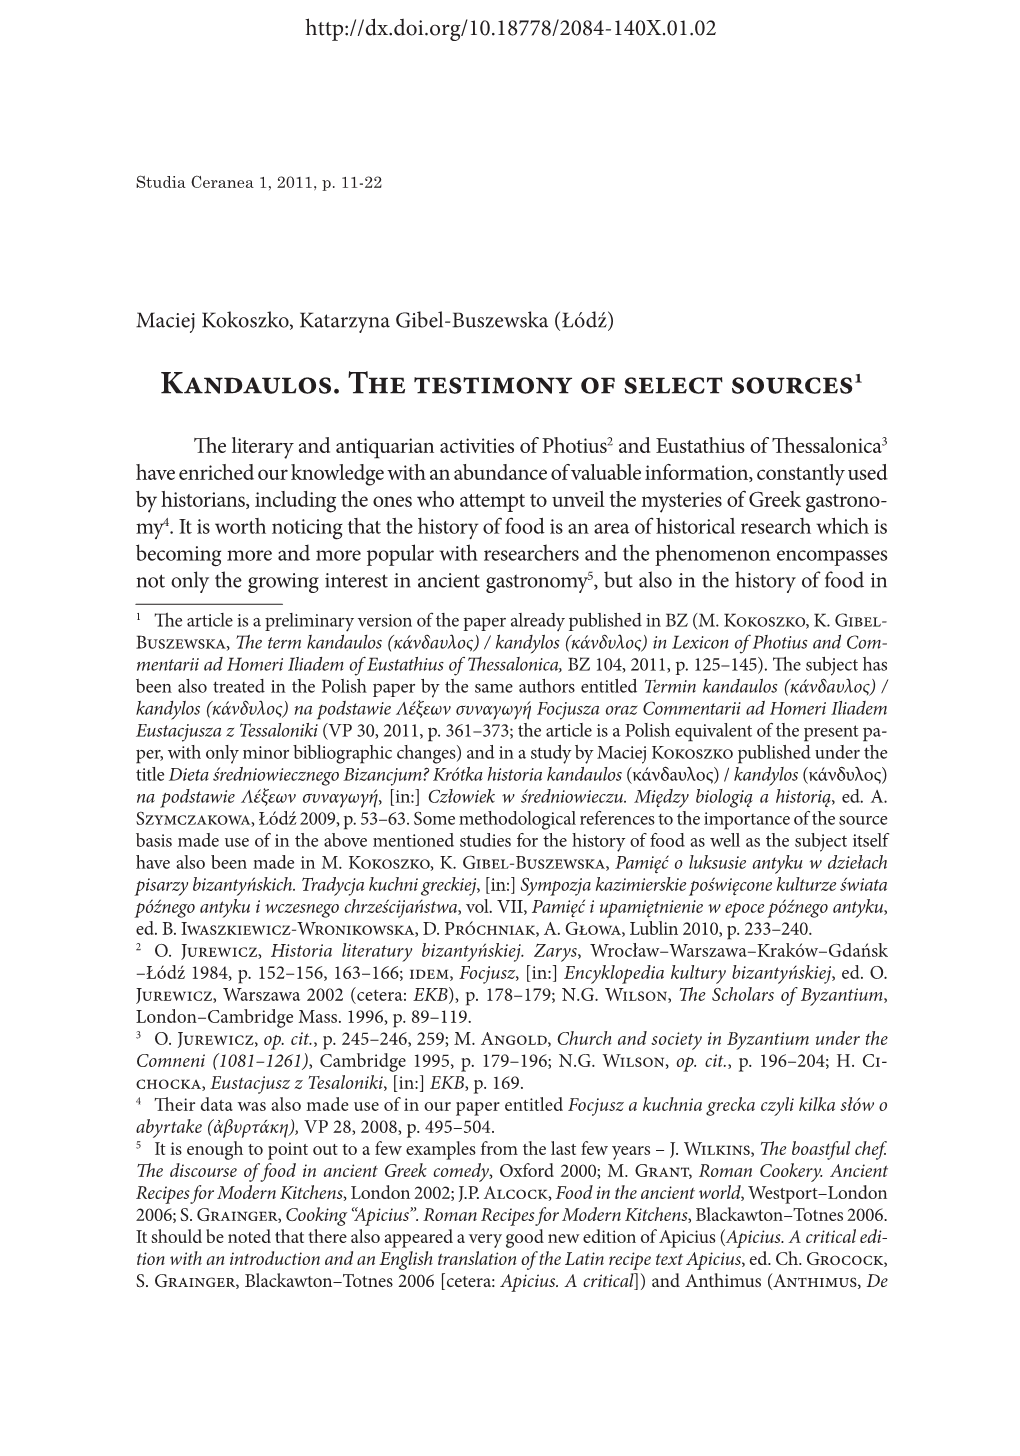 Kandaulos. the Testimony of Select Sources1